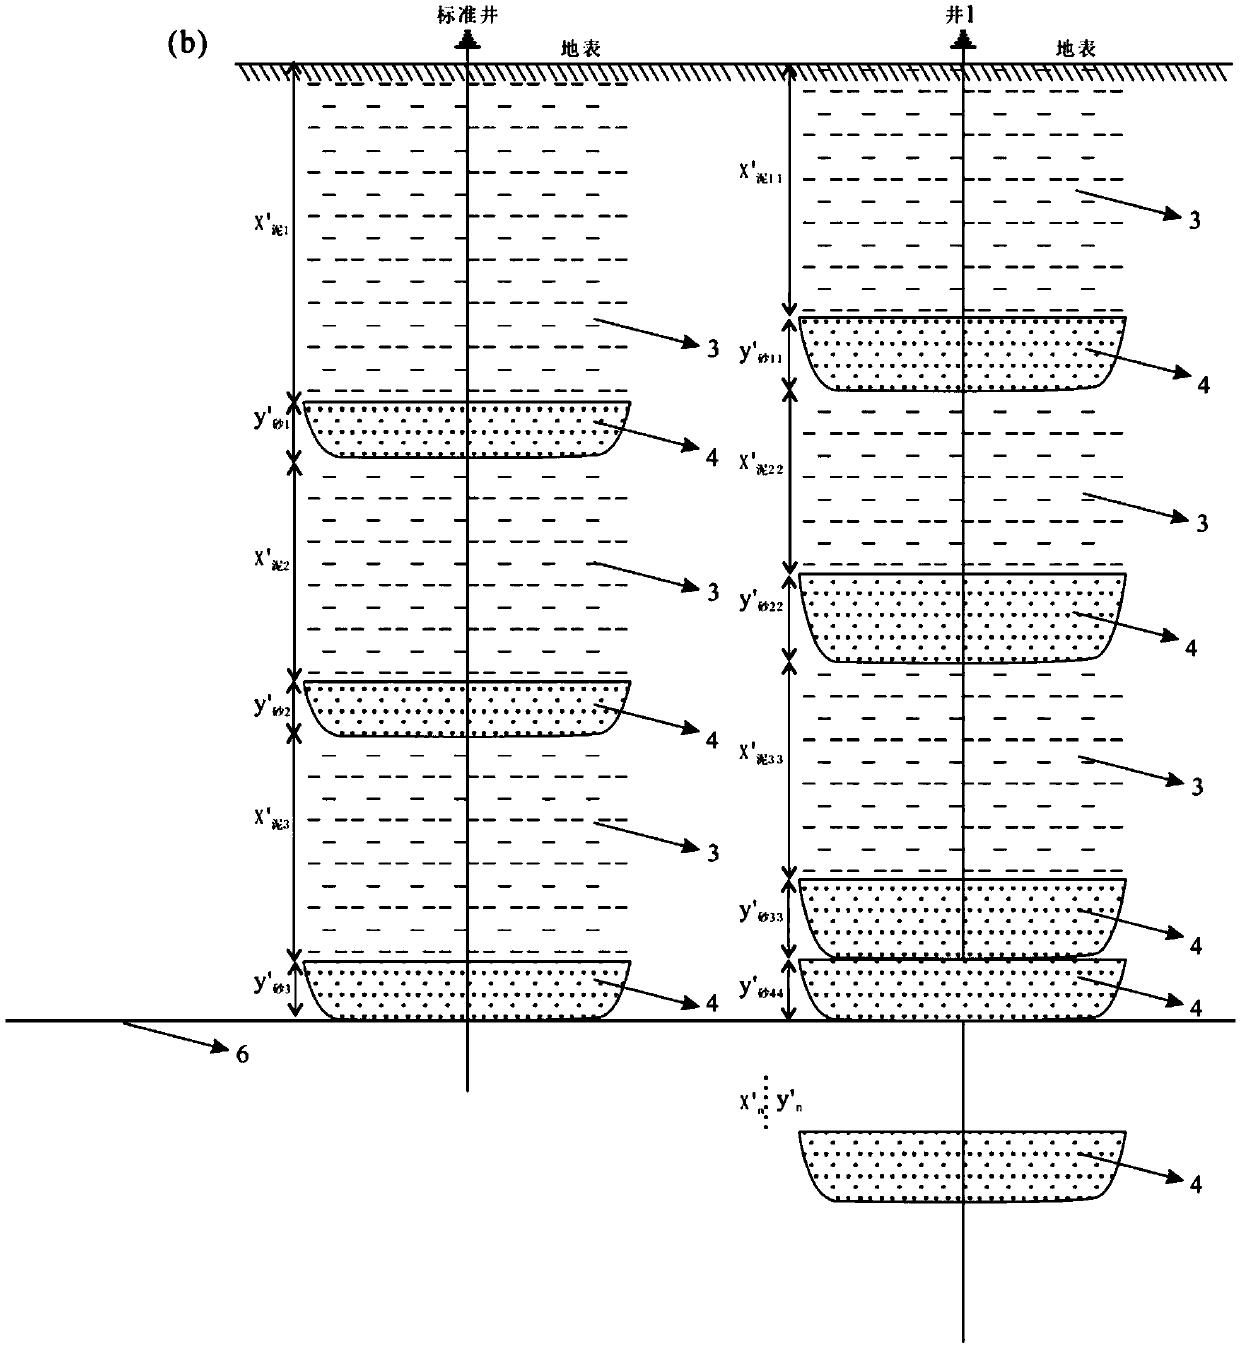 Compaction-correction-based isochronous stratigraphic interface tracking and contrasting method